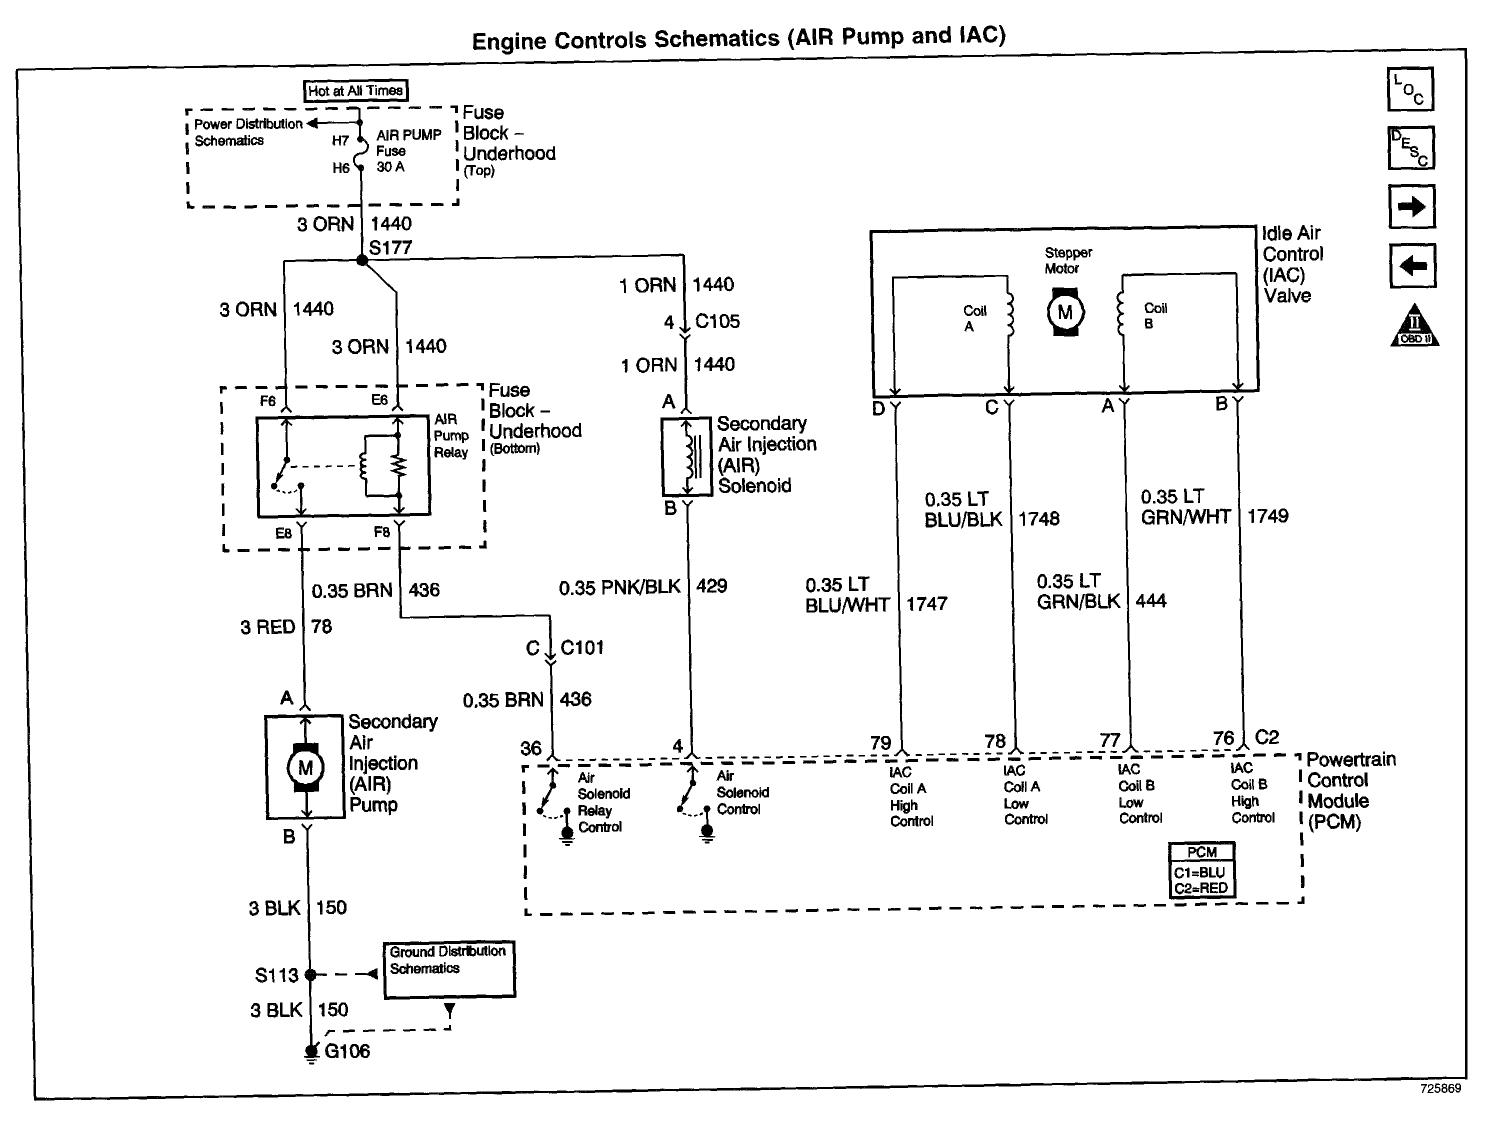 1999 camaro pcm pinout issue - LS1TECH - Camaro and ... jeep cj7 ignition wiring diagram 